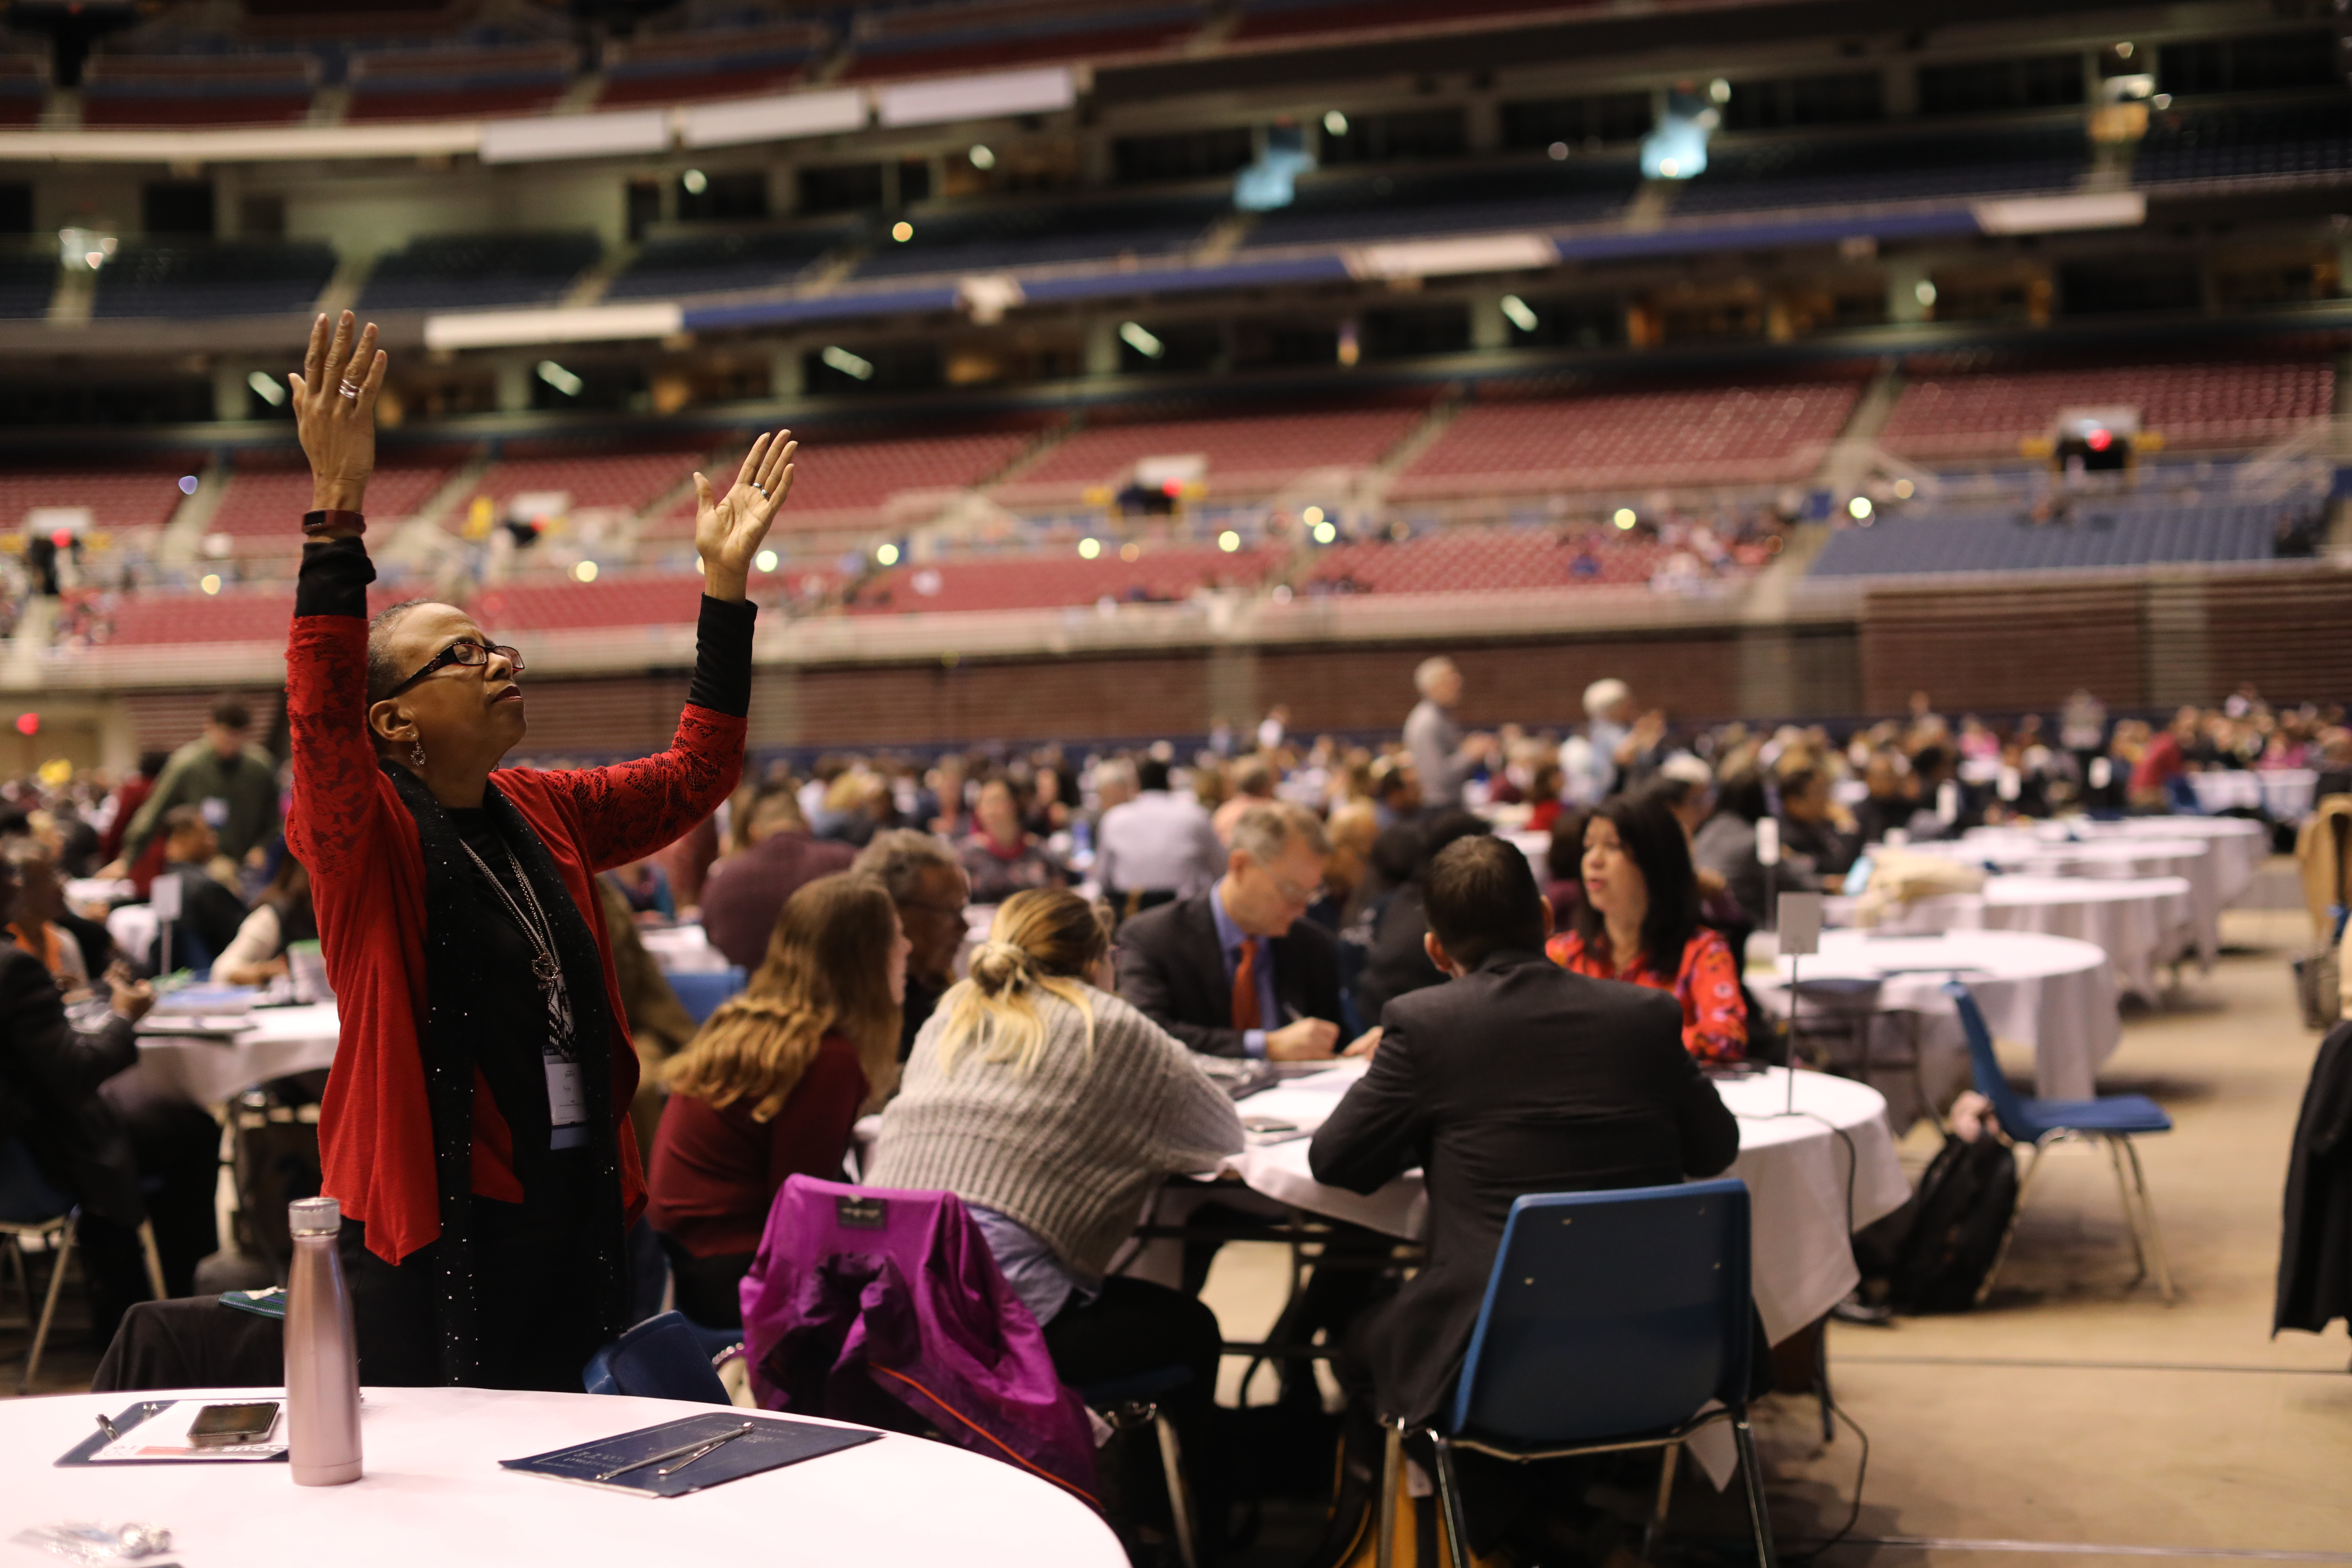 Cheryl Jefferson Bell, delegate (standing) from the Great Plains Conference, raises her hands in prayer during the Feb. 23 morning of prayer at the 2019 Special Session of the United Methodist General Conference in St. Louis.  Photo by Kathleen Barry, UMNS.